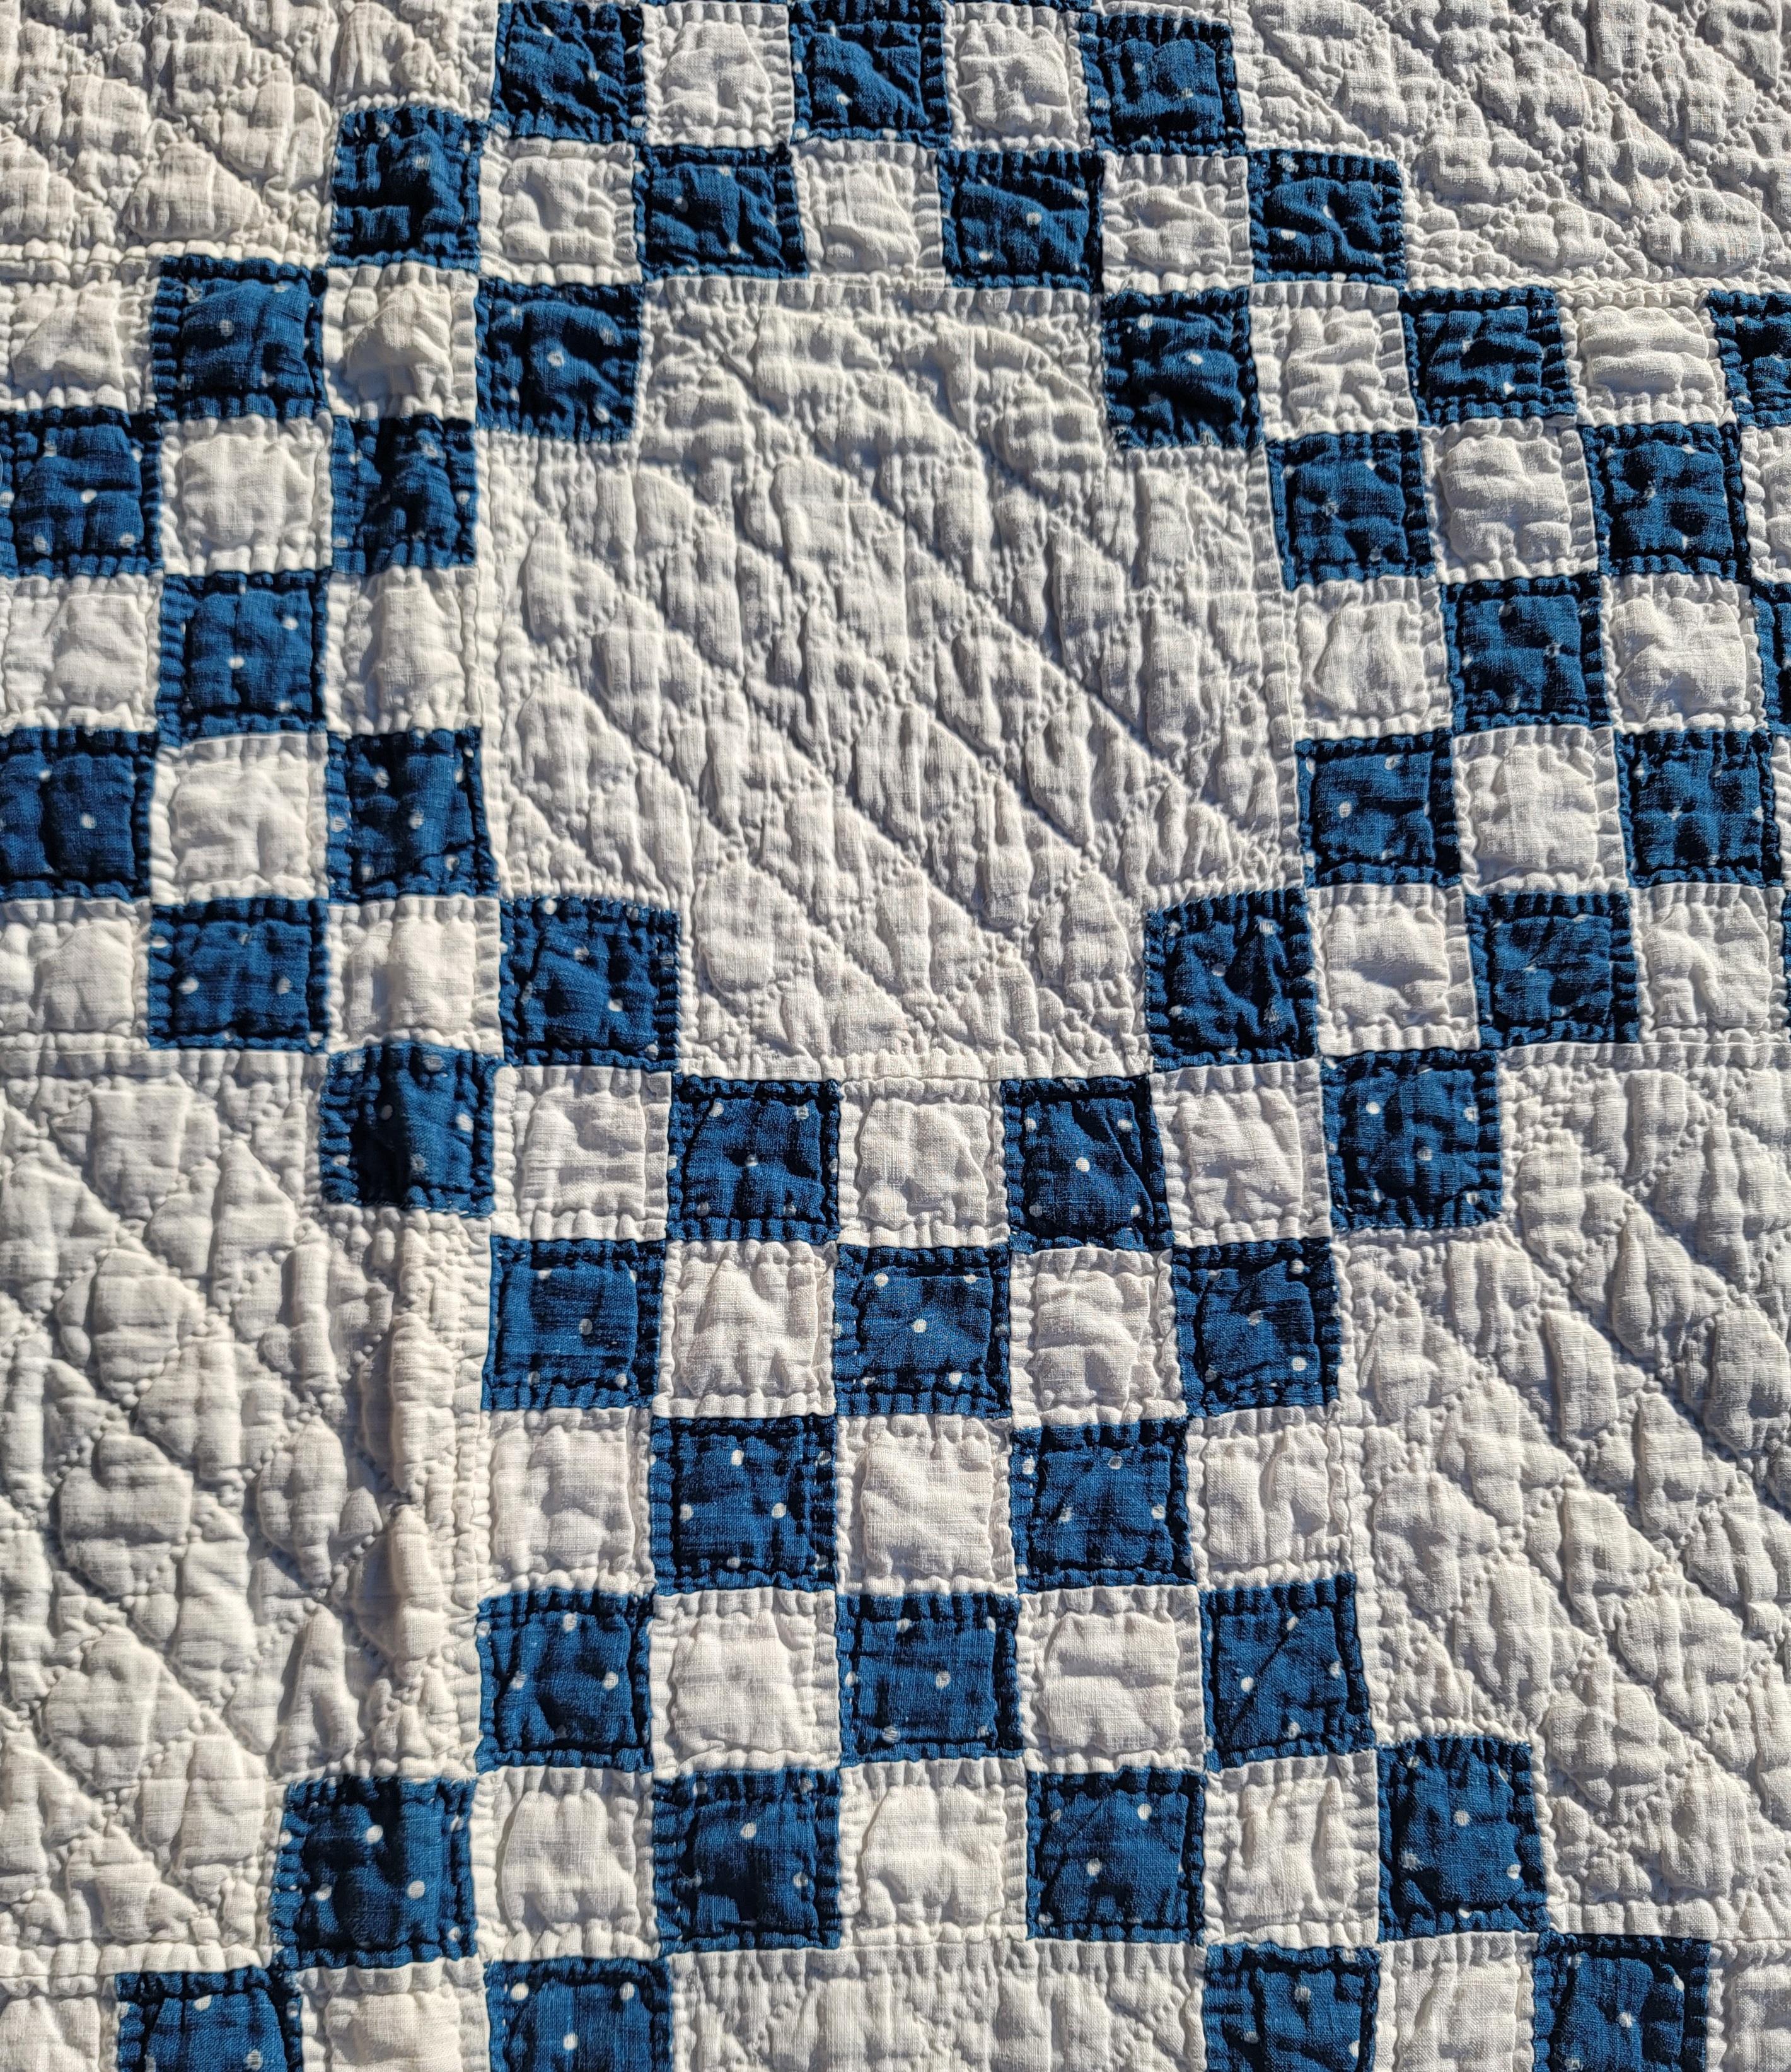 Hand-Crafted 19thc Mini Pieced Blue & WhiteChain Postage Stamp Quilt For Sale